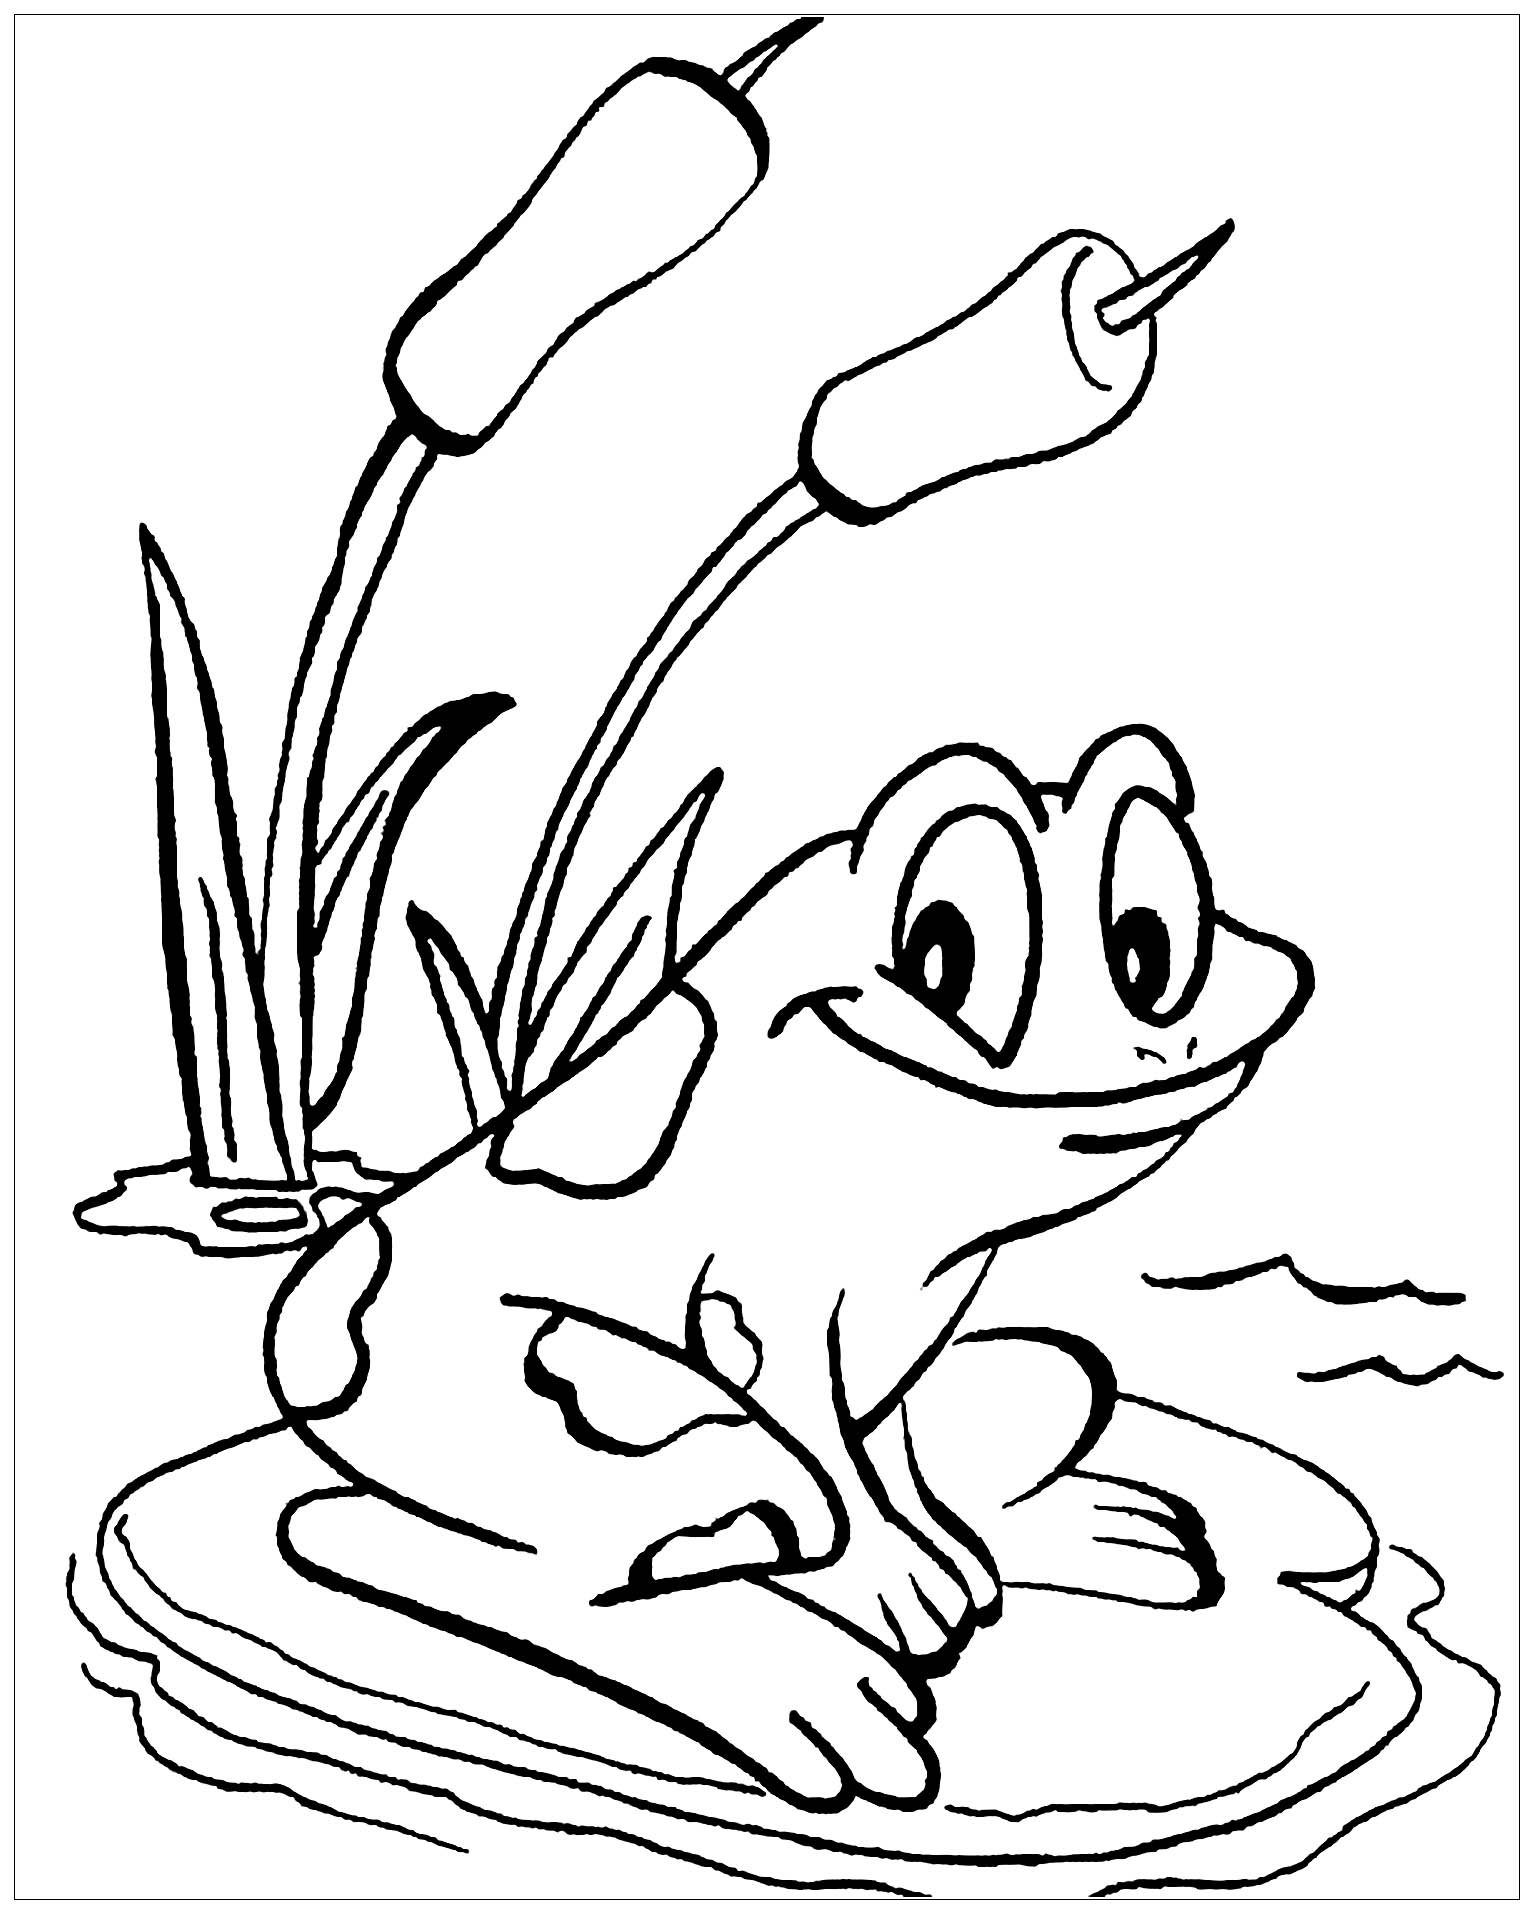 Fun frog coloring pages to print and color